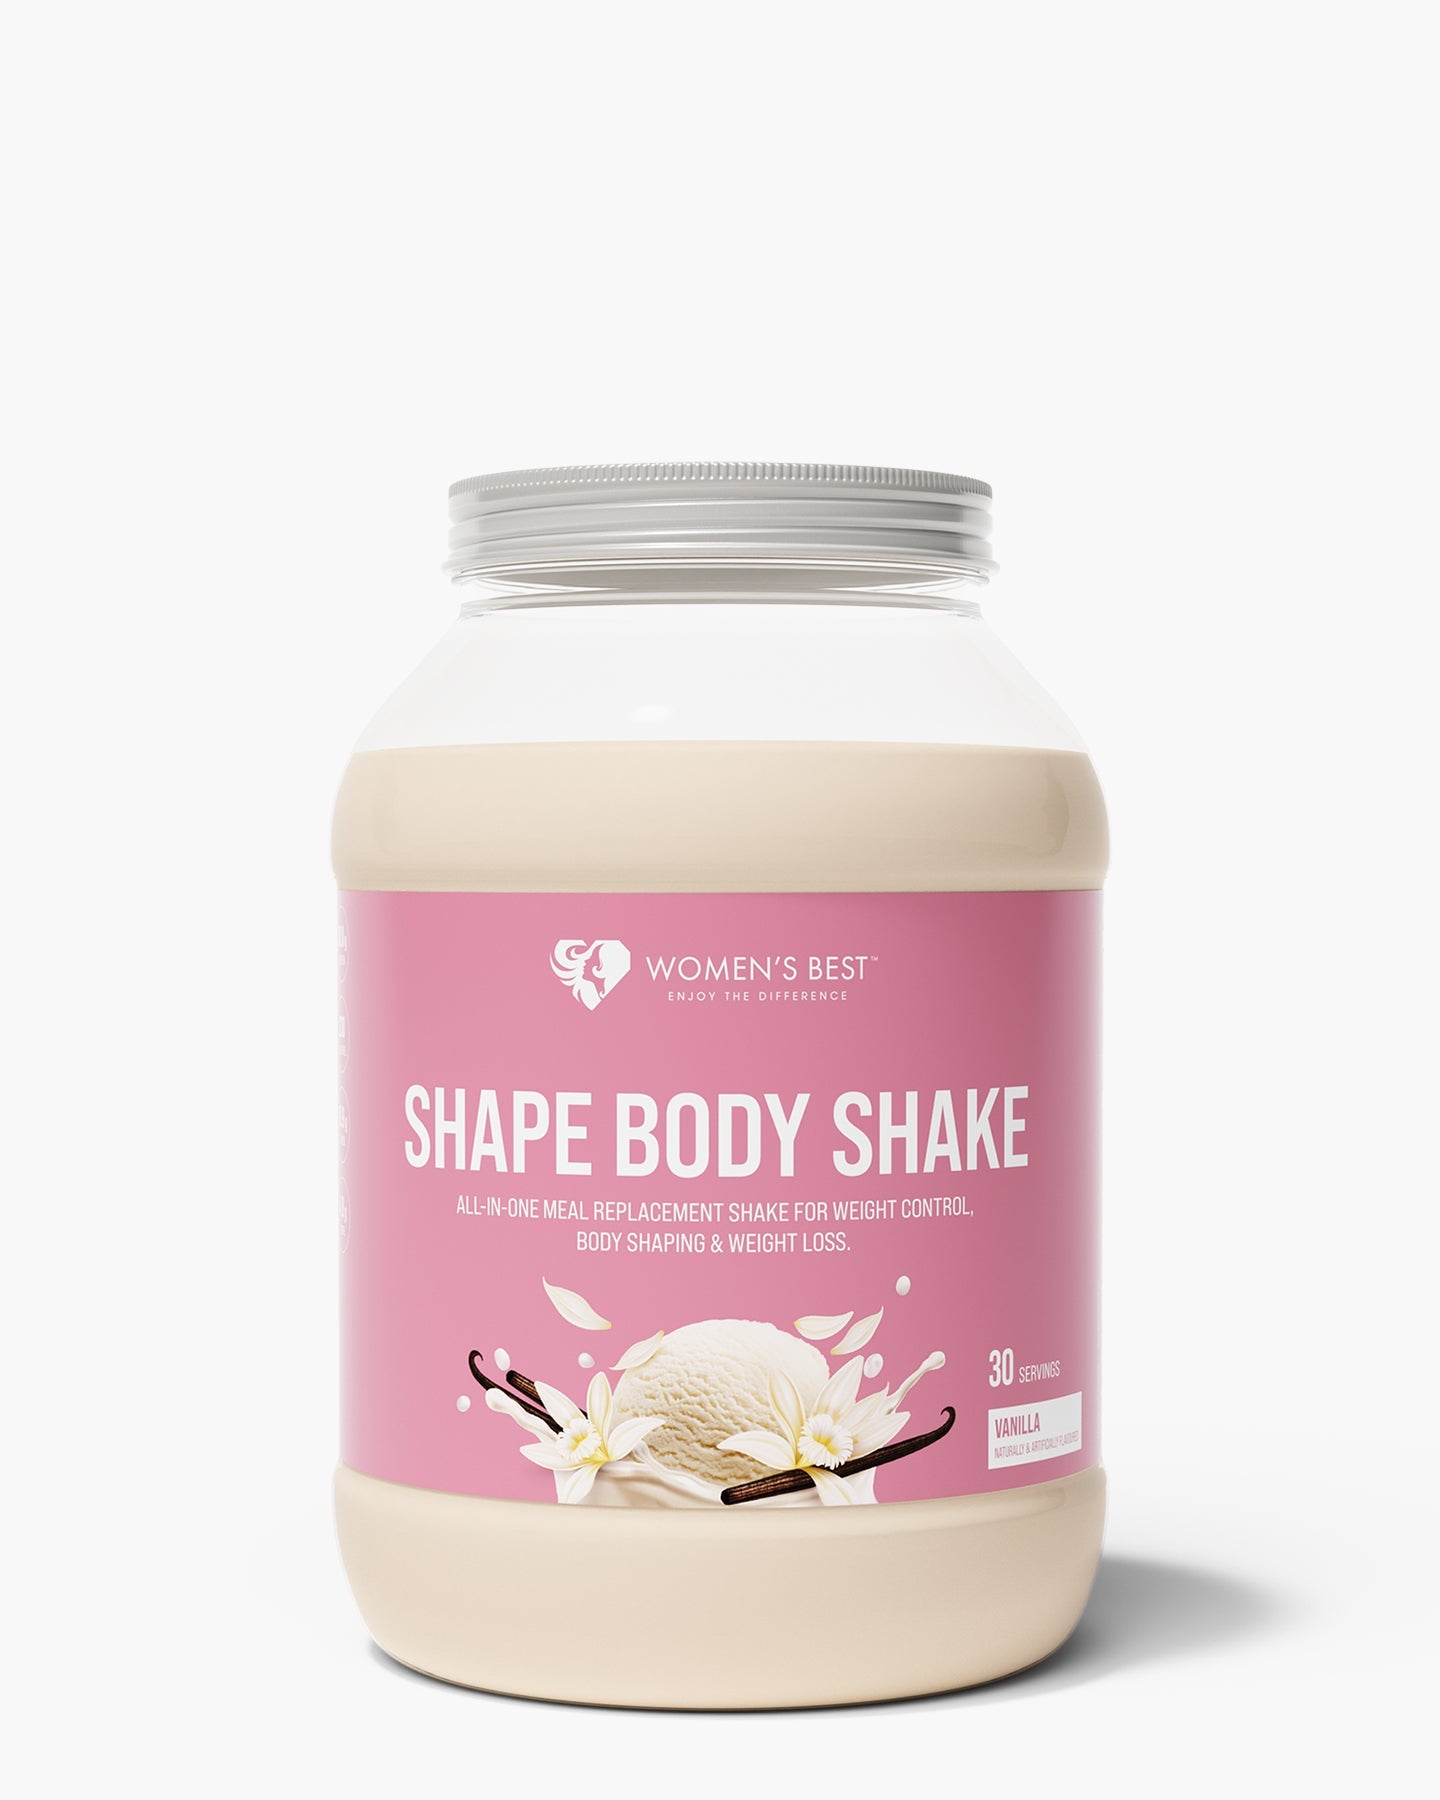 What Are Meal Replacement Shakes?